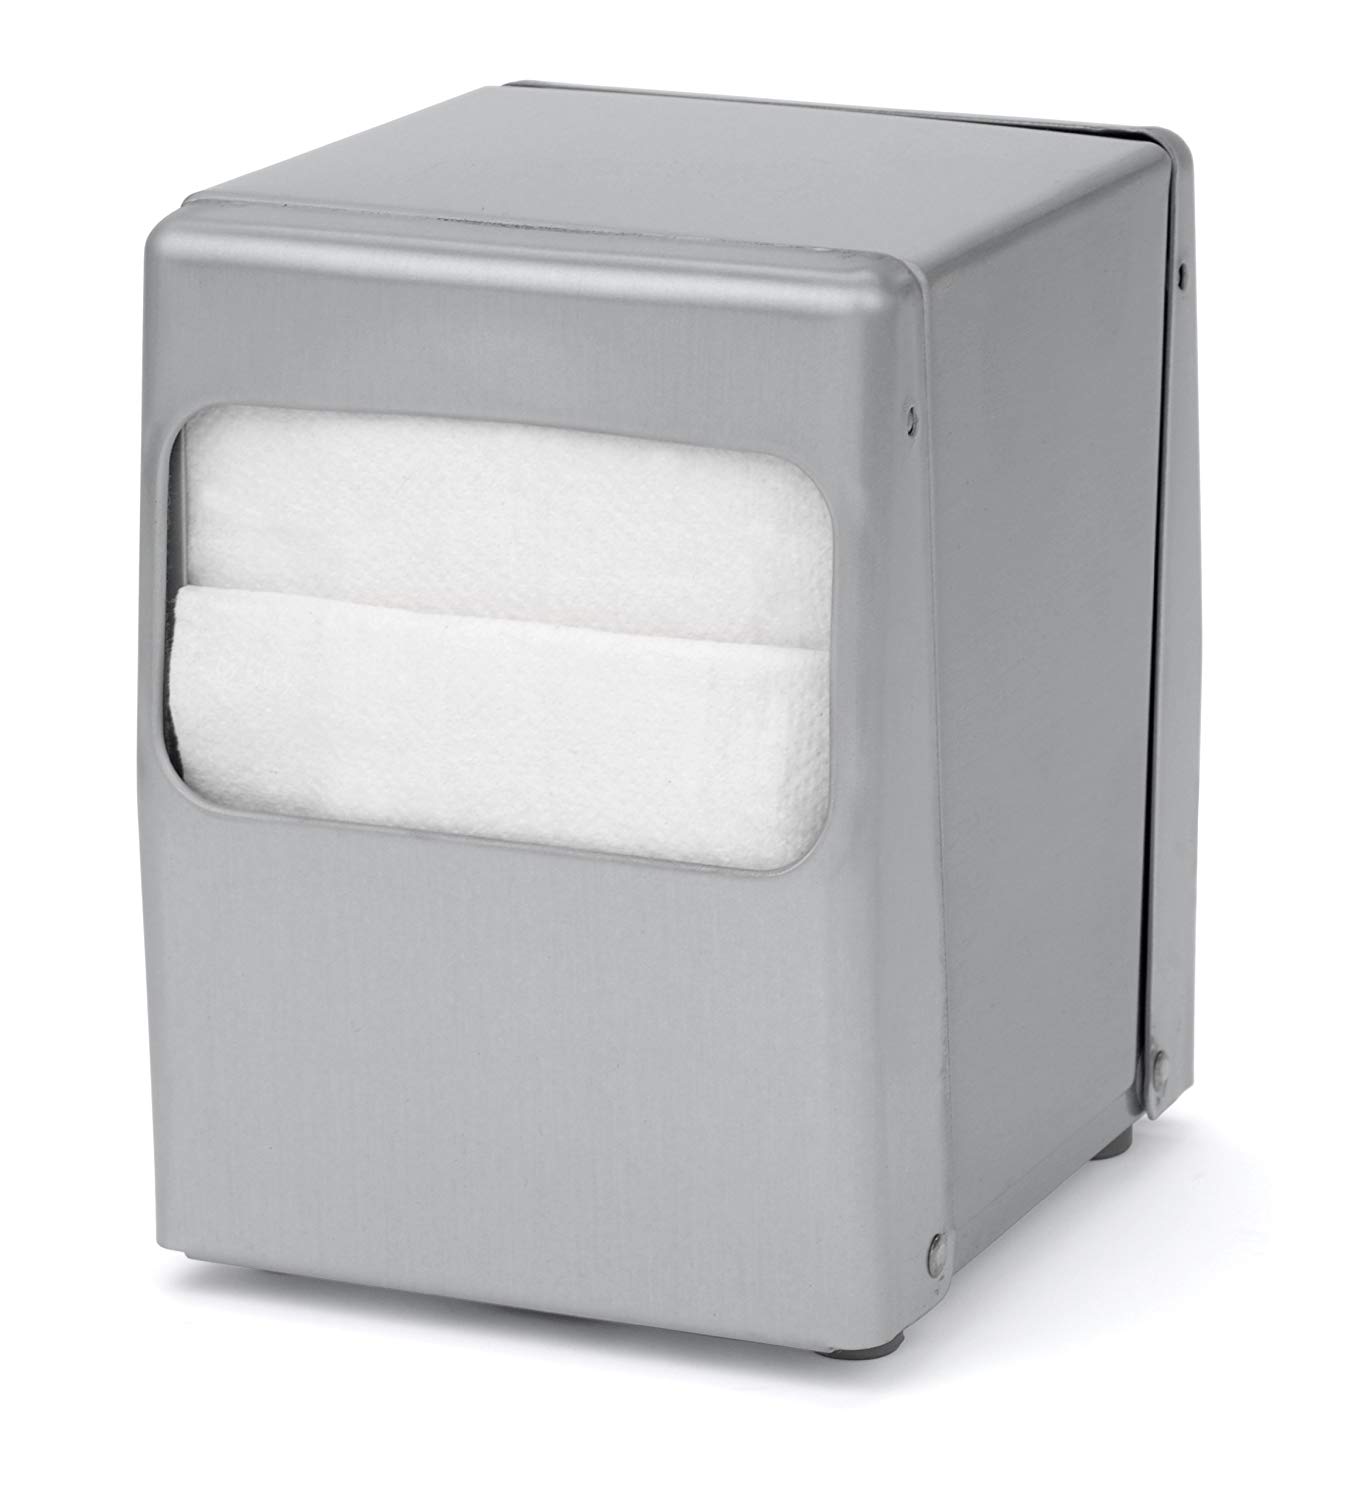 Details about   Palmer Cascade Table Top Full Fold Napkin Dispenser We ship fast...